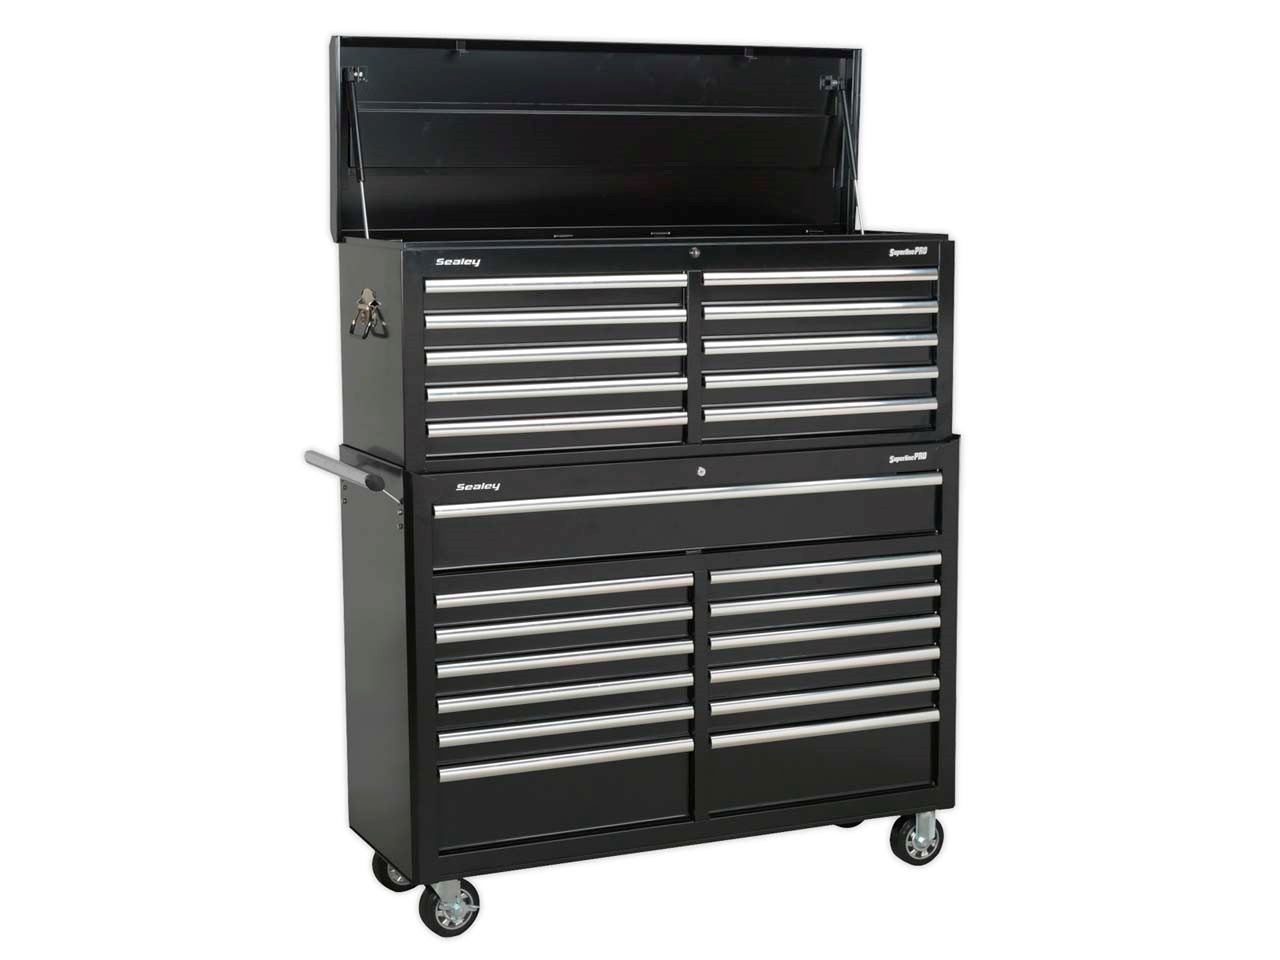 Sealey Ap52combo2 Black 23 Drawer Tool Chest Combination